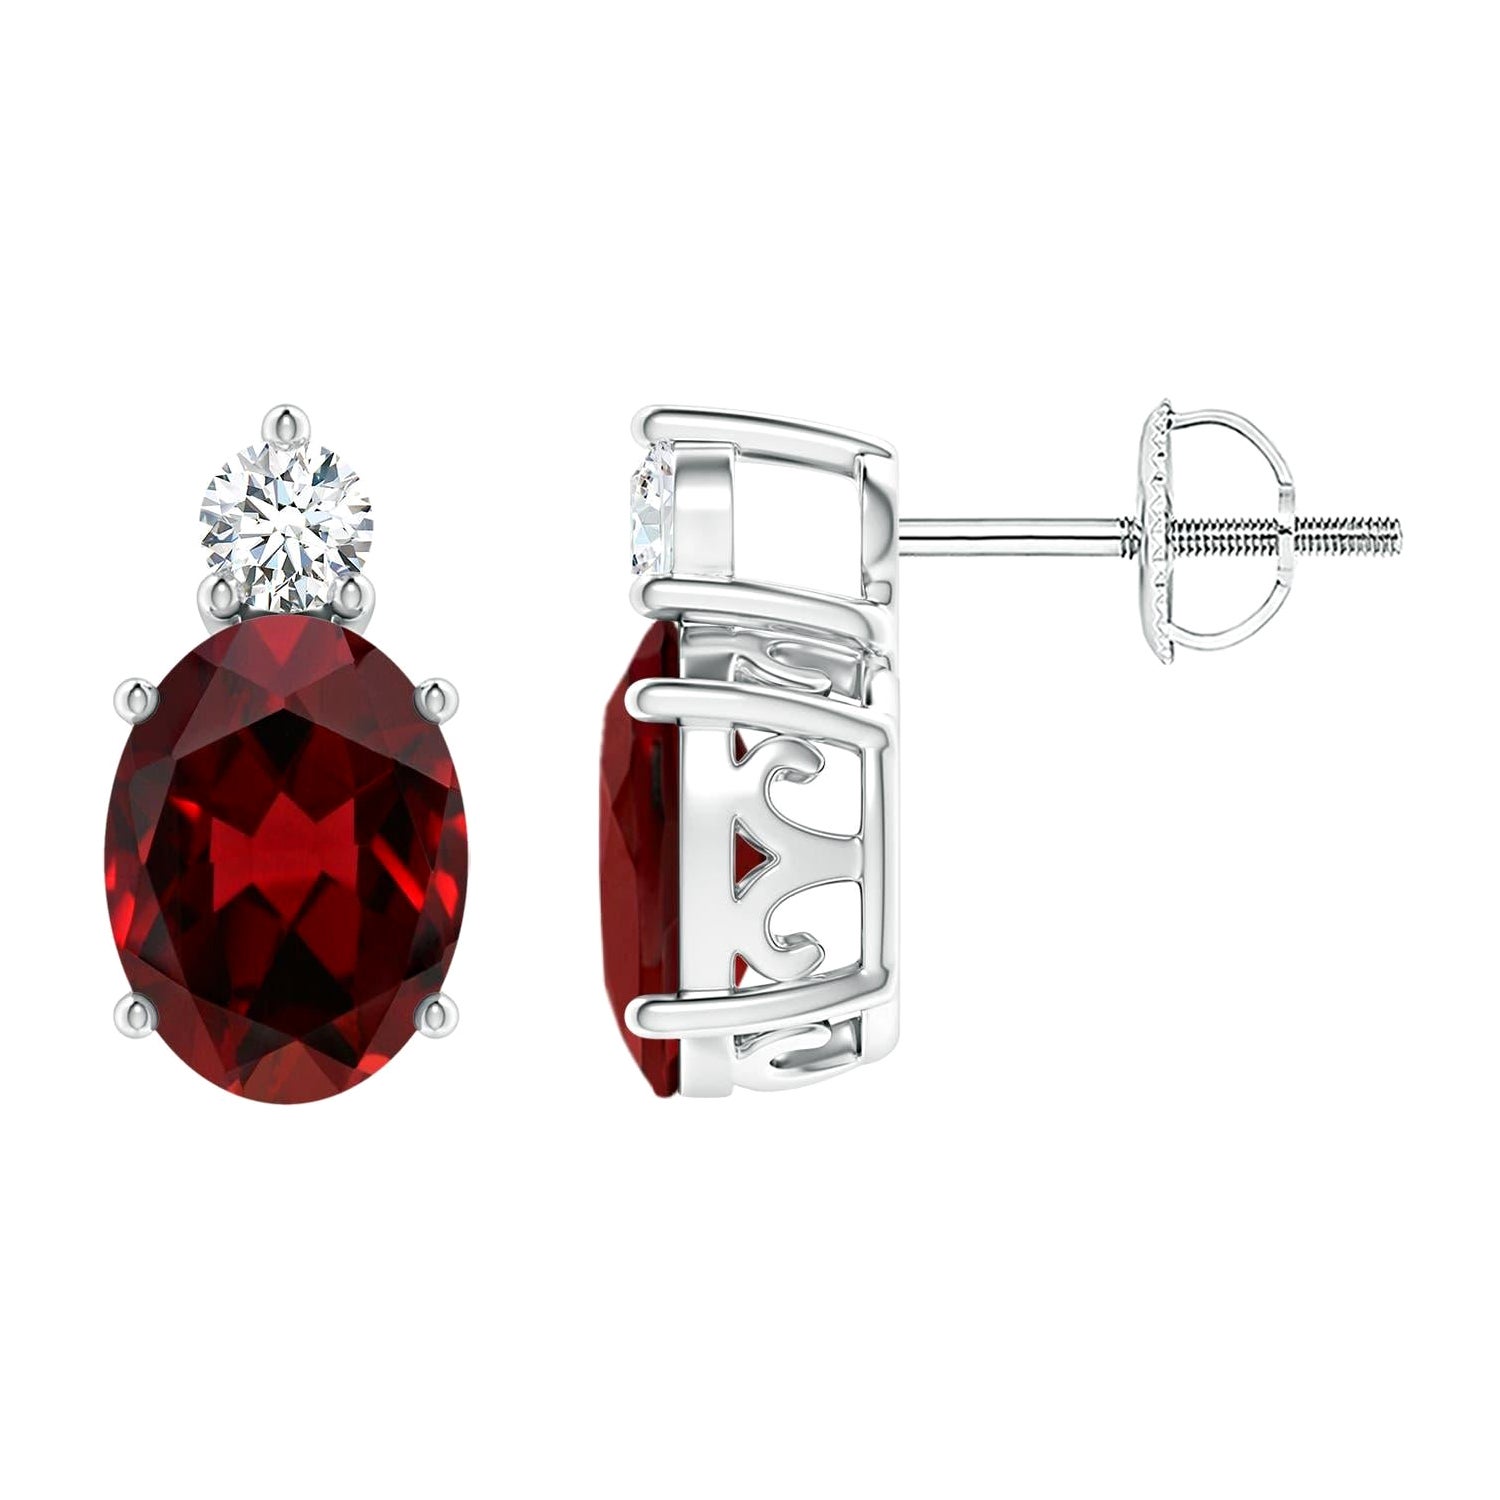 Natural Oval 2.9ct Garnet Stud Earrings with Diamond in Platinum